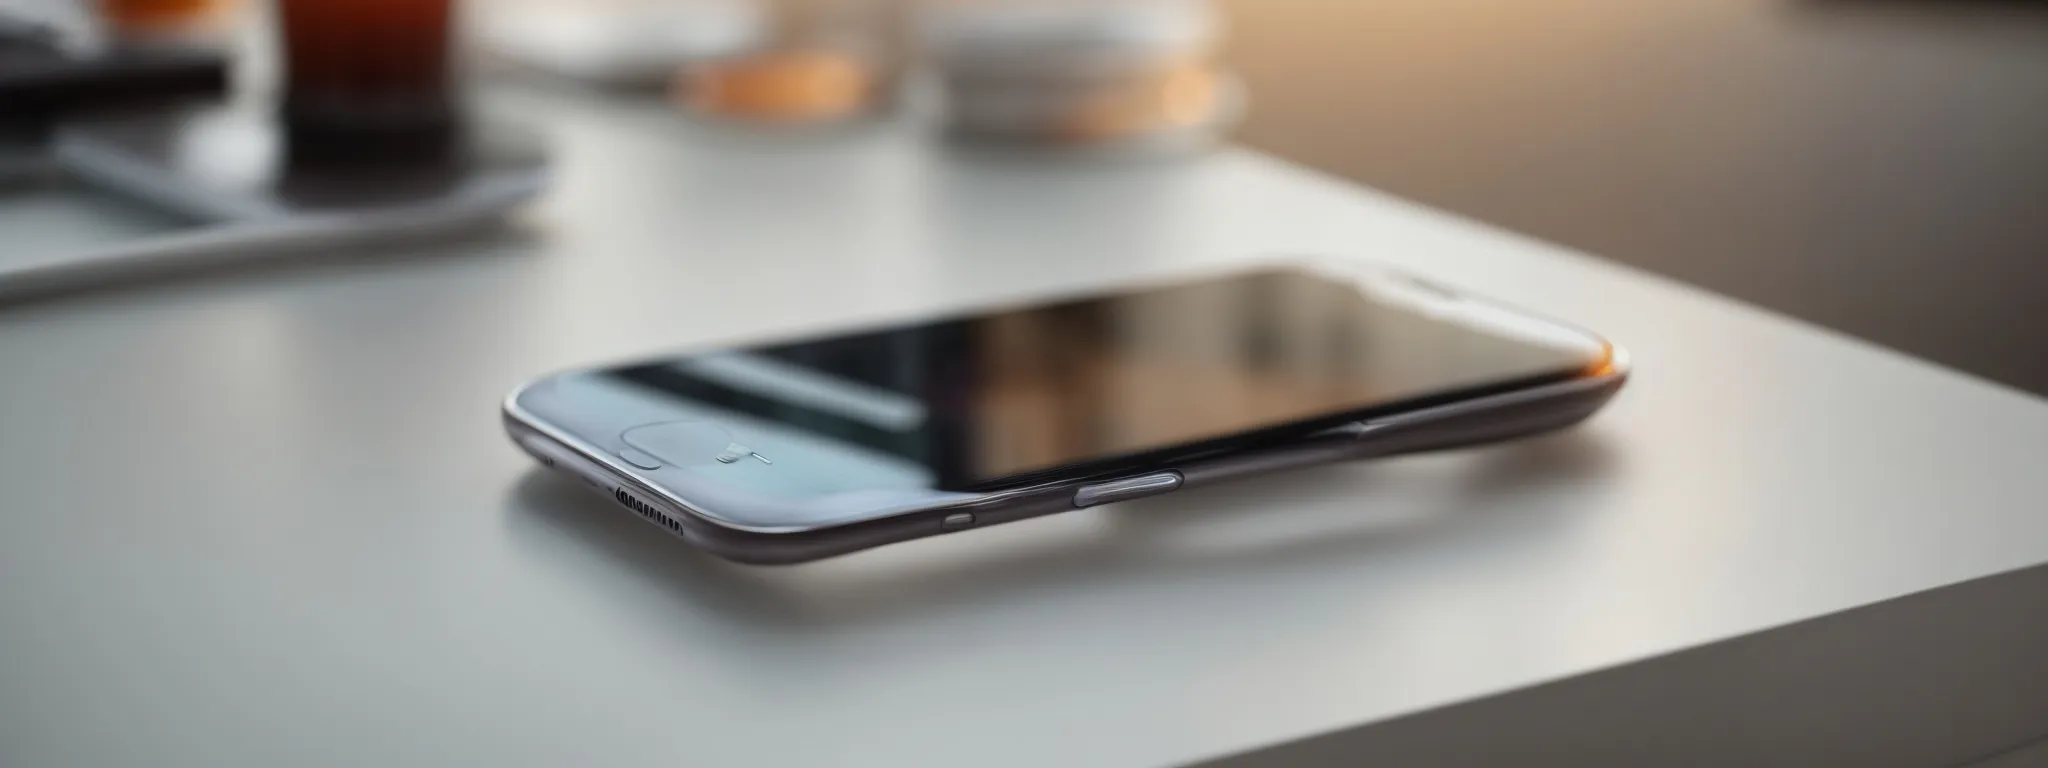 a smartphone resting on a bright, minimalistic desk with a fast-moving blur effect indicating speed.